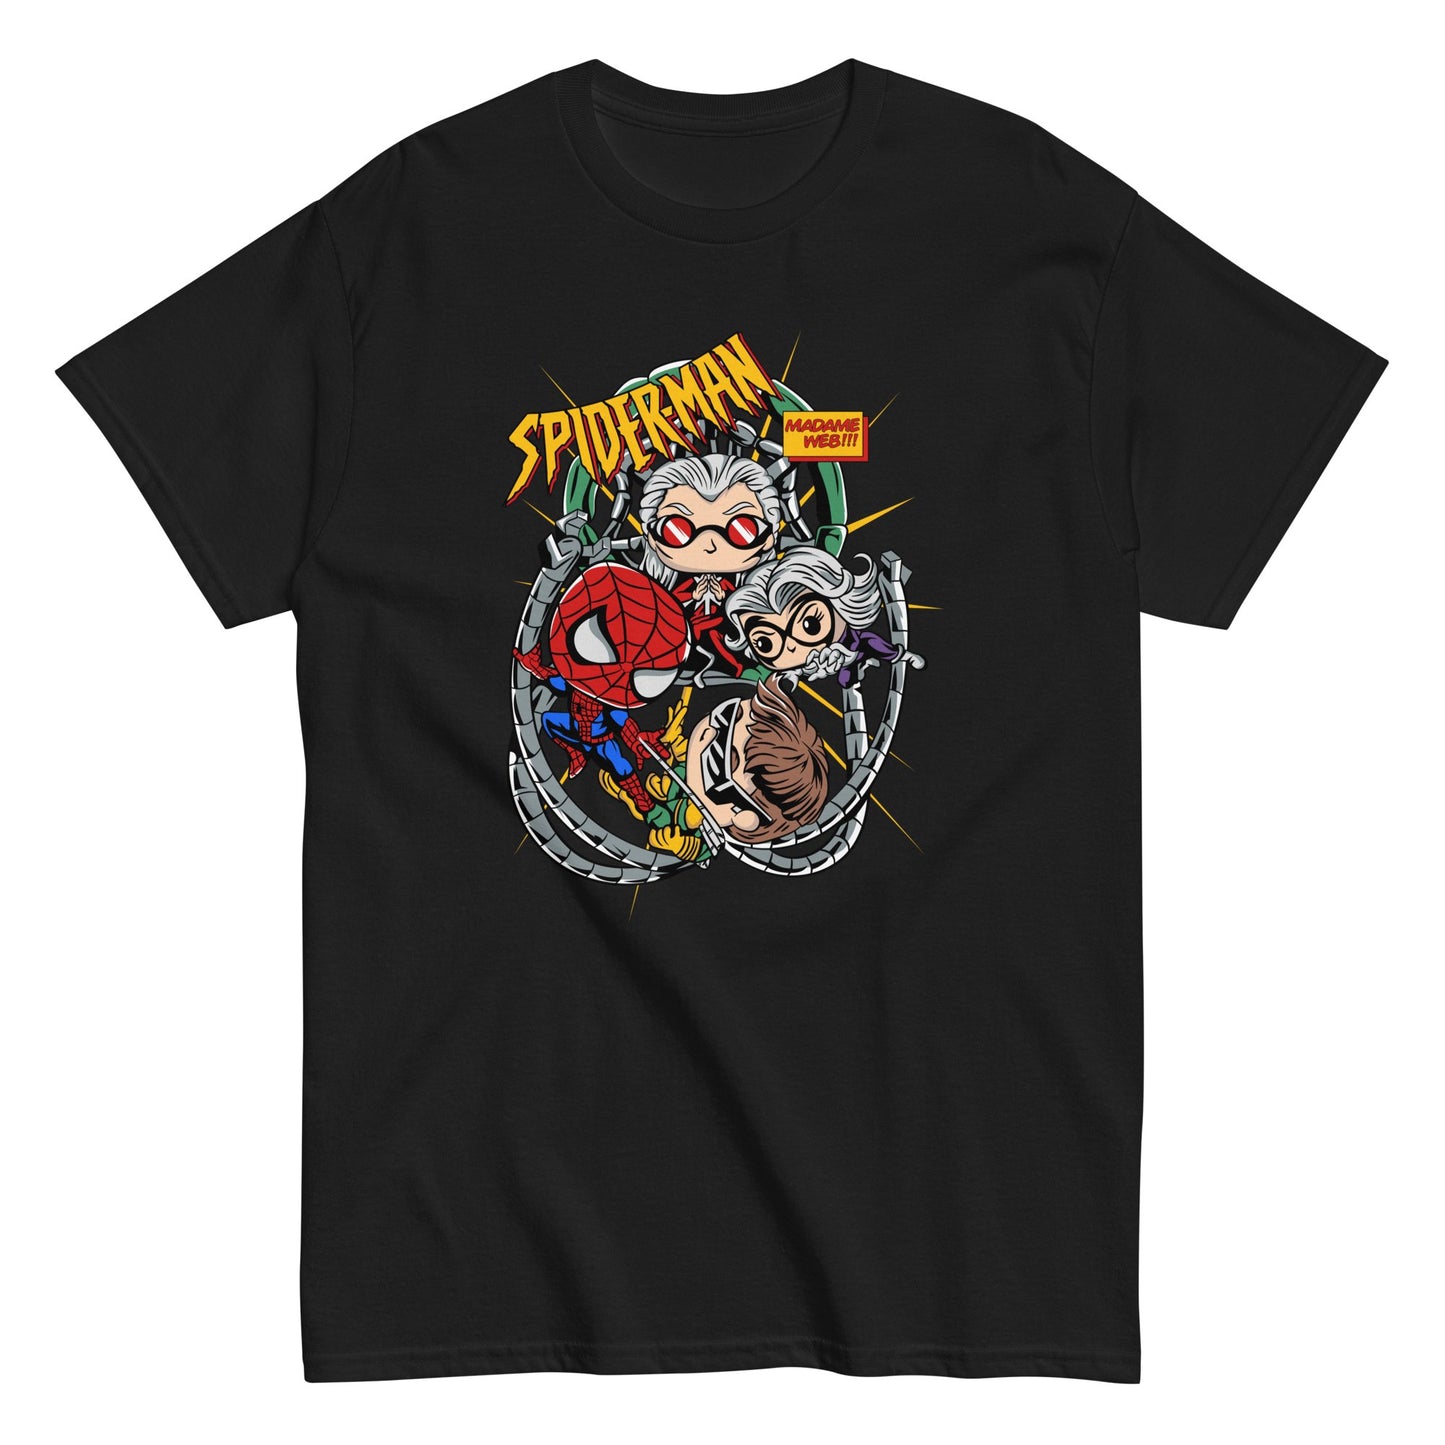 Explore Marvel Magic with Our Exclusive Spider-Man Graphic Tees - The Truth Graphics